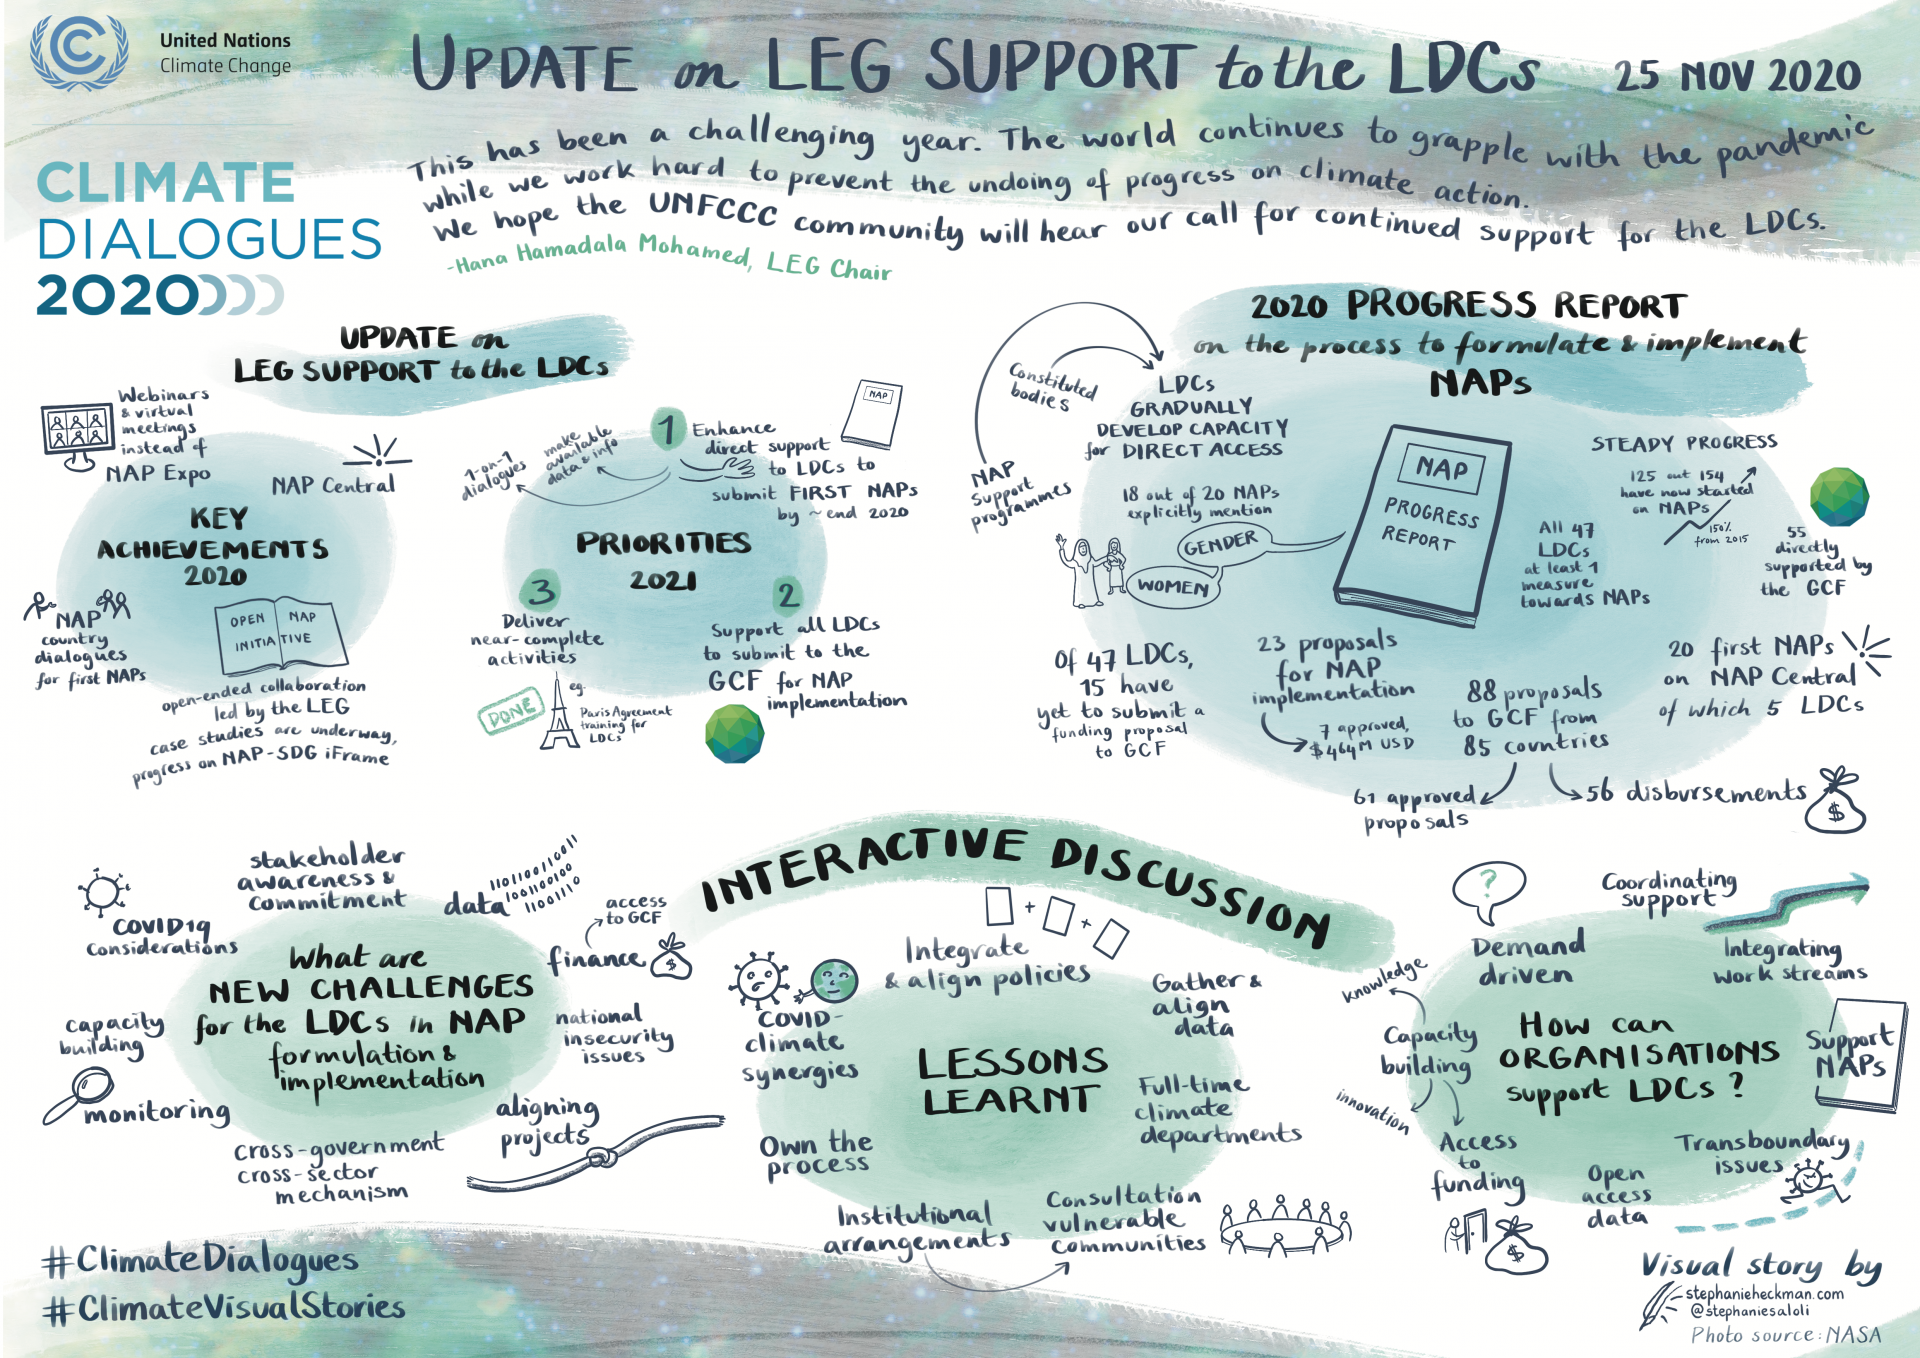 Update on LEG support to the least developed countries under the UNFCCC